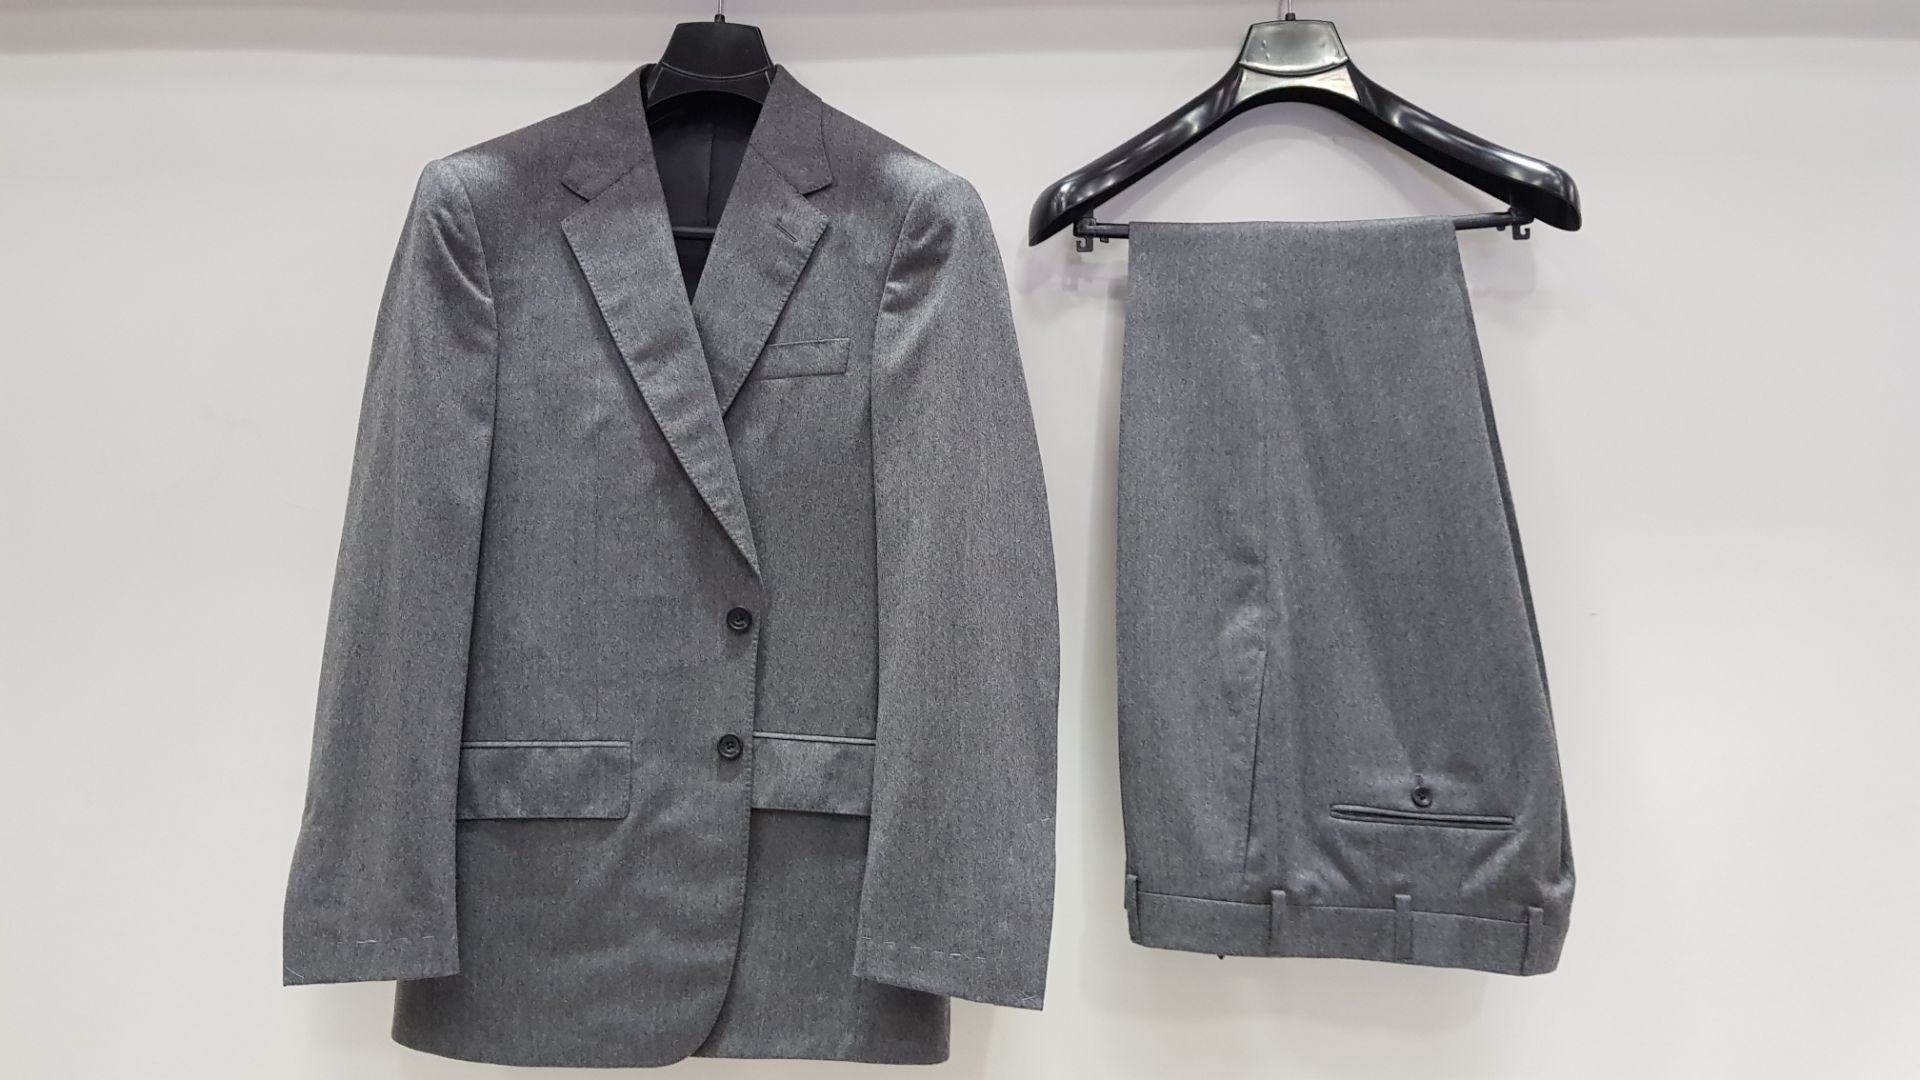 3 X BRAND NEW LUTWYCHE HAND TAILORED SUTS IN VARIOIS SHADED OF GREY (ONLY SIZE STATED 44R) (PLEASE